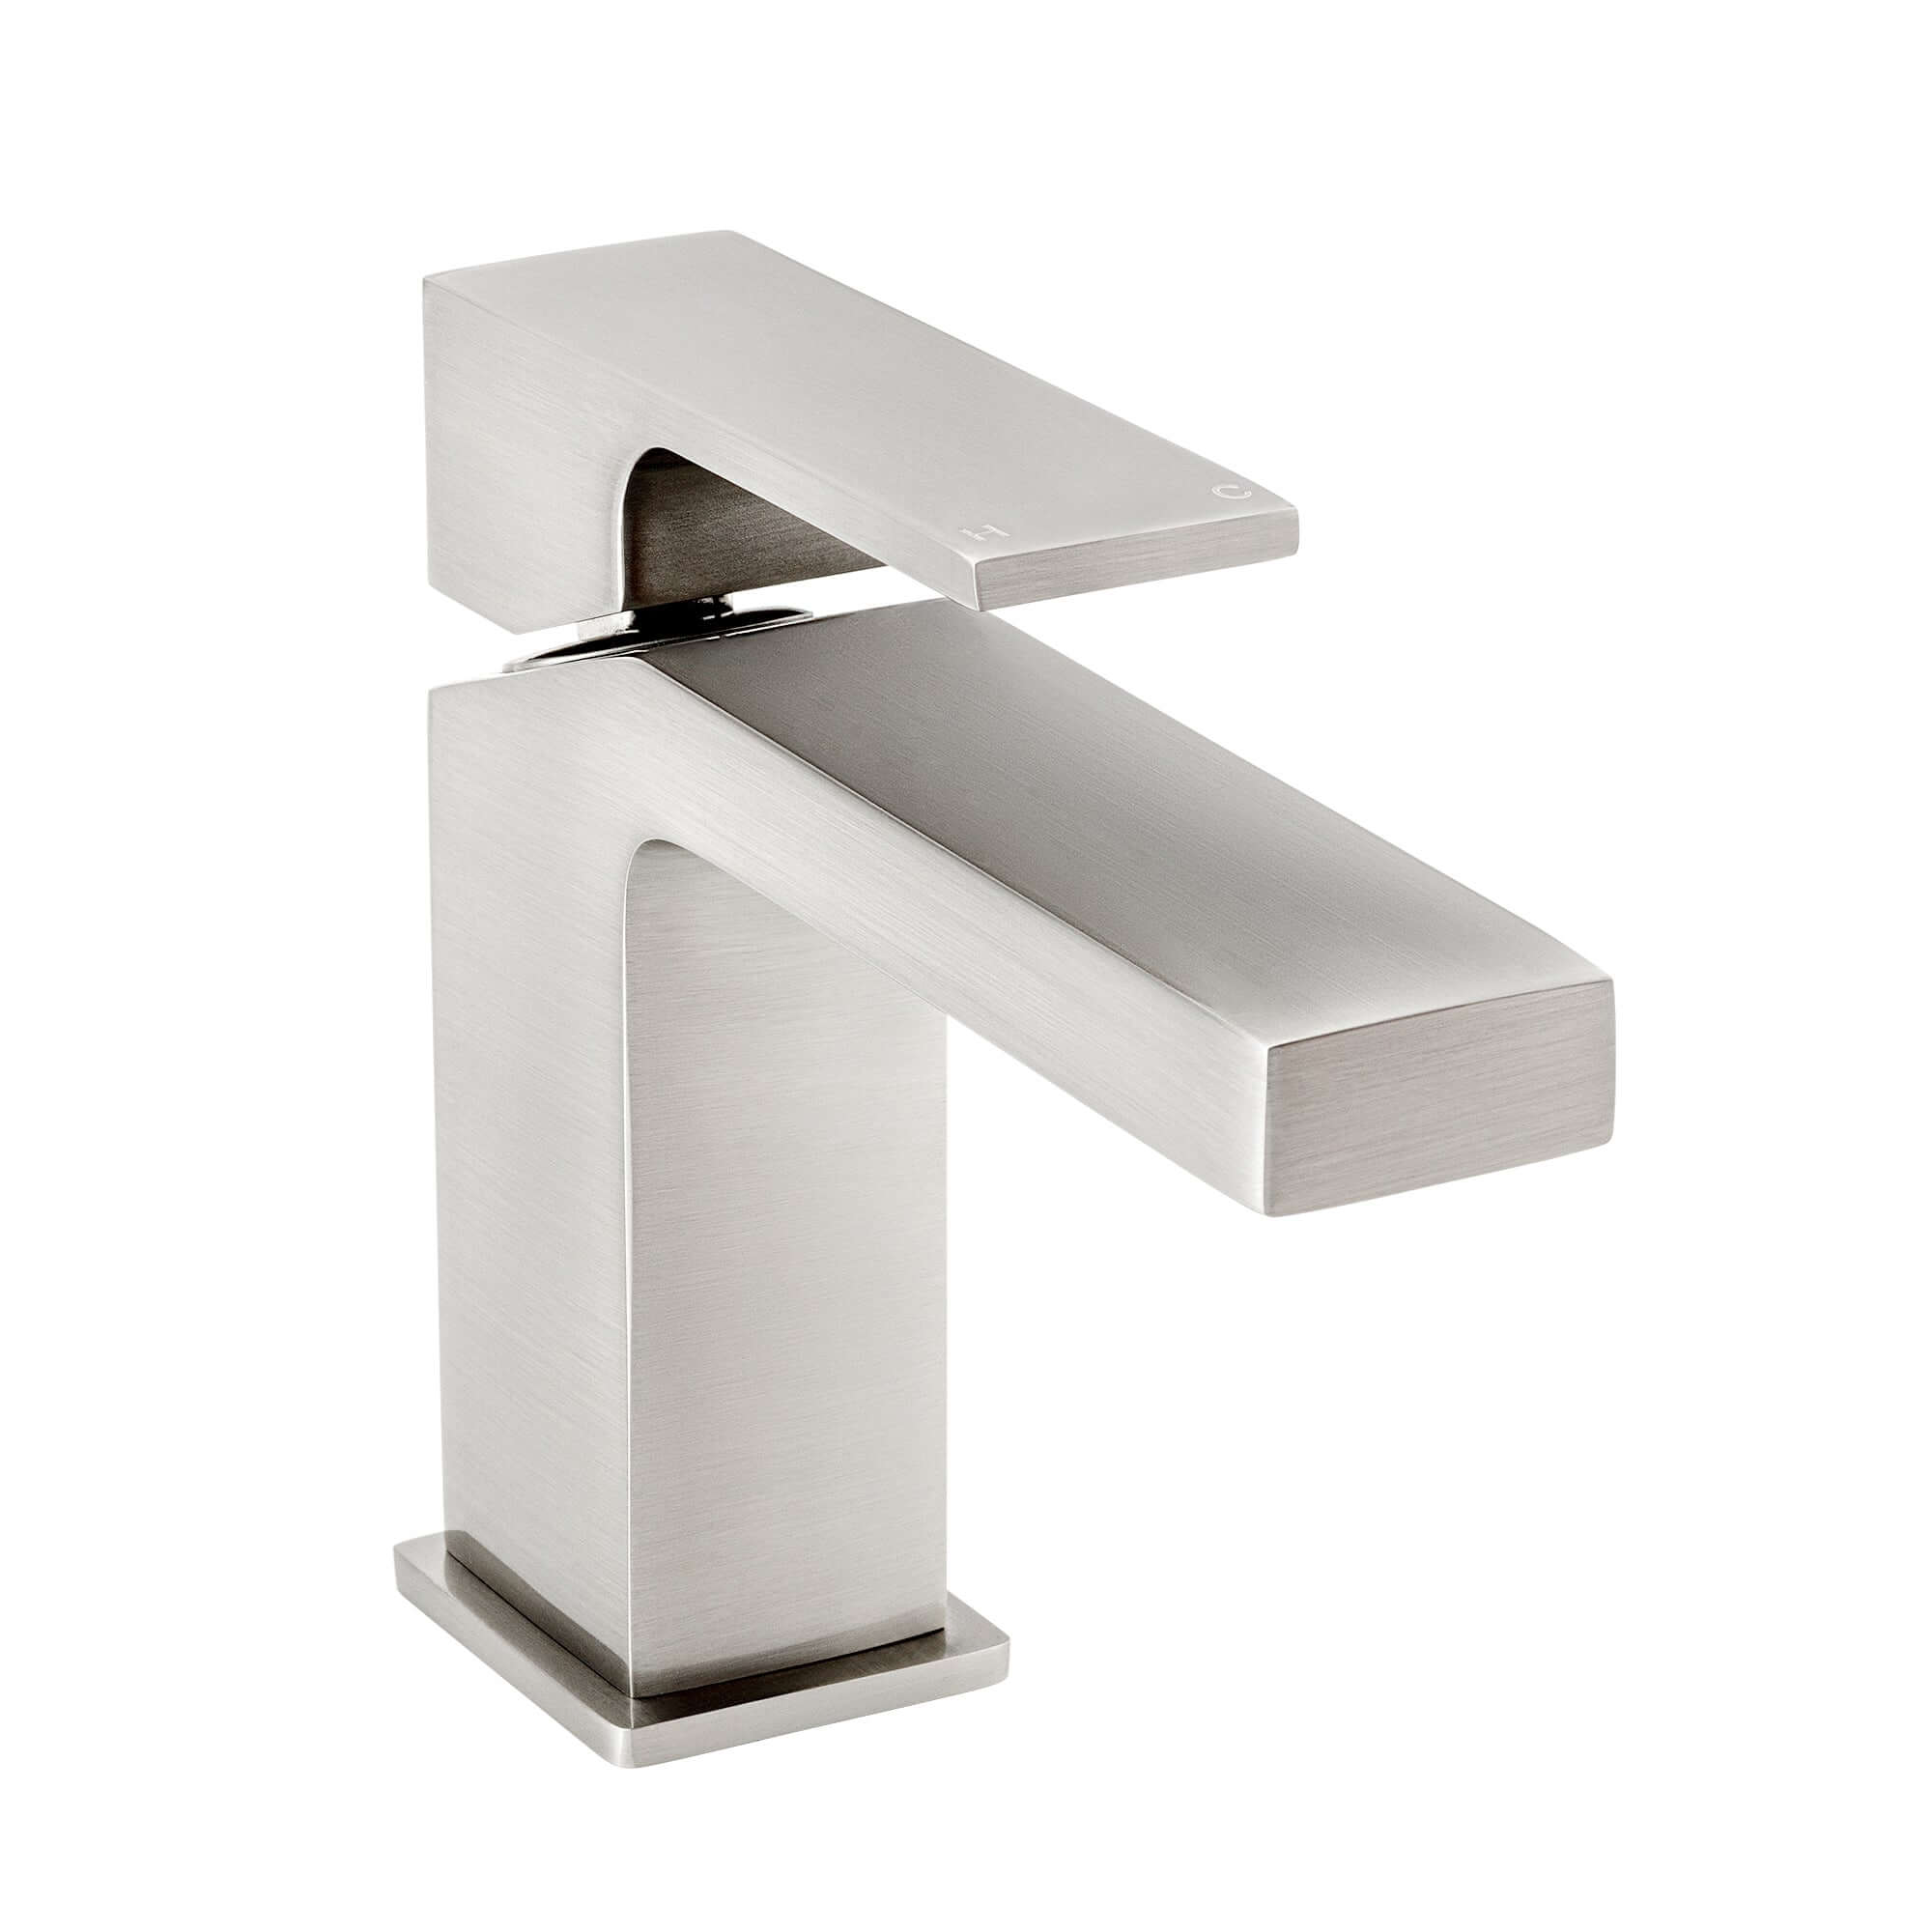 Athena contemporary square basin sink mixer tap - brushed nickel